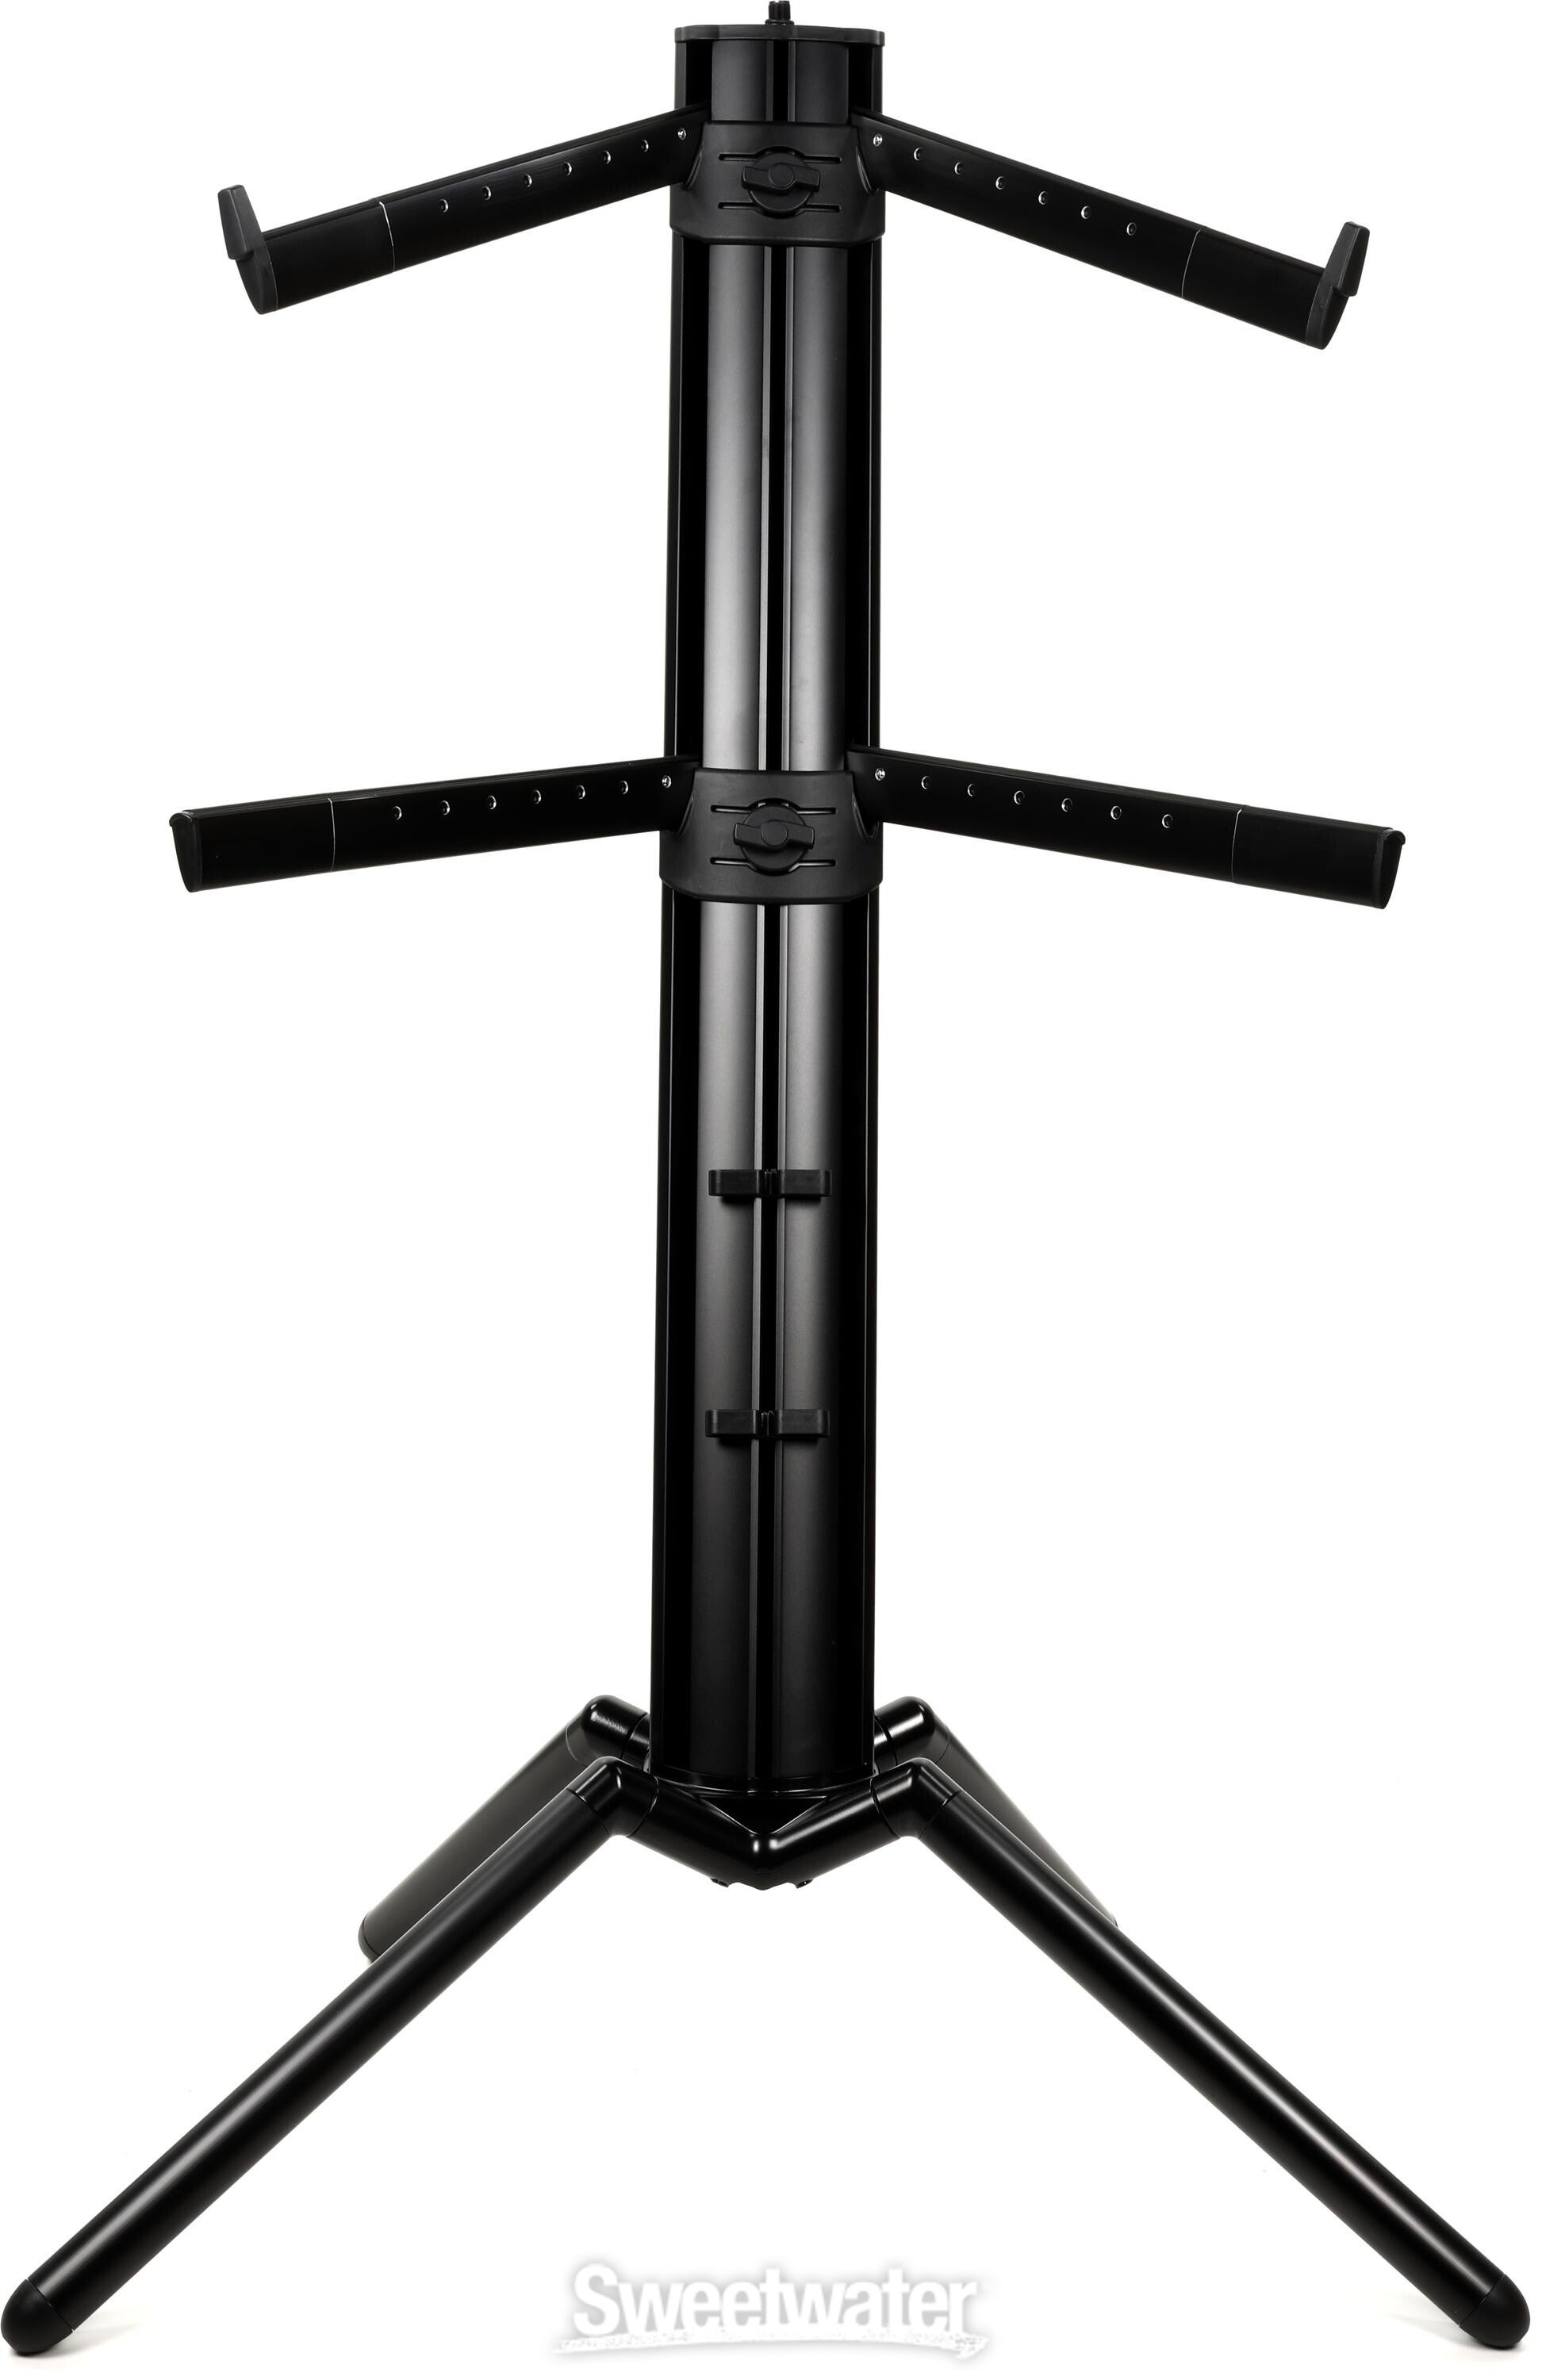 K&M 18860 Spider Pro Keyboard Stand - Black | Sweetwater